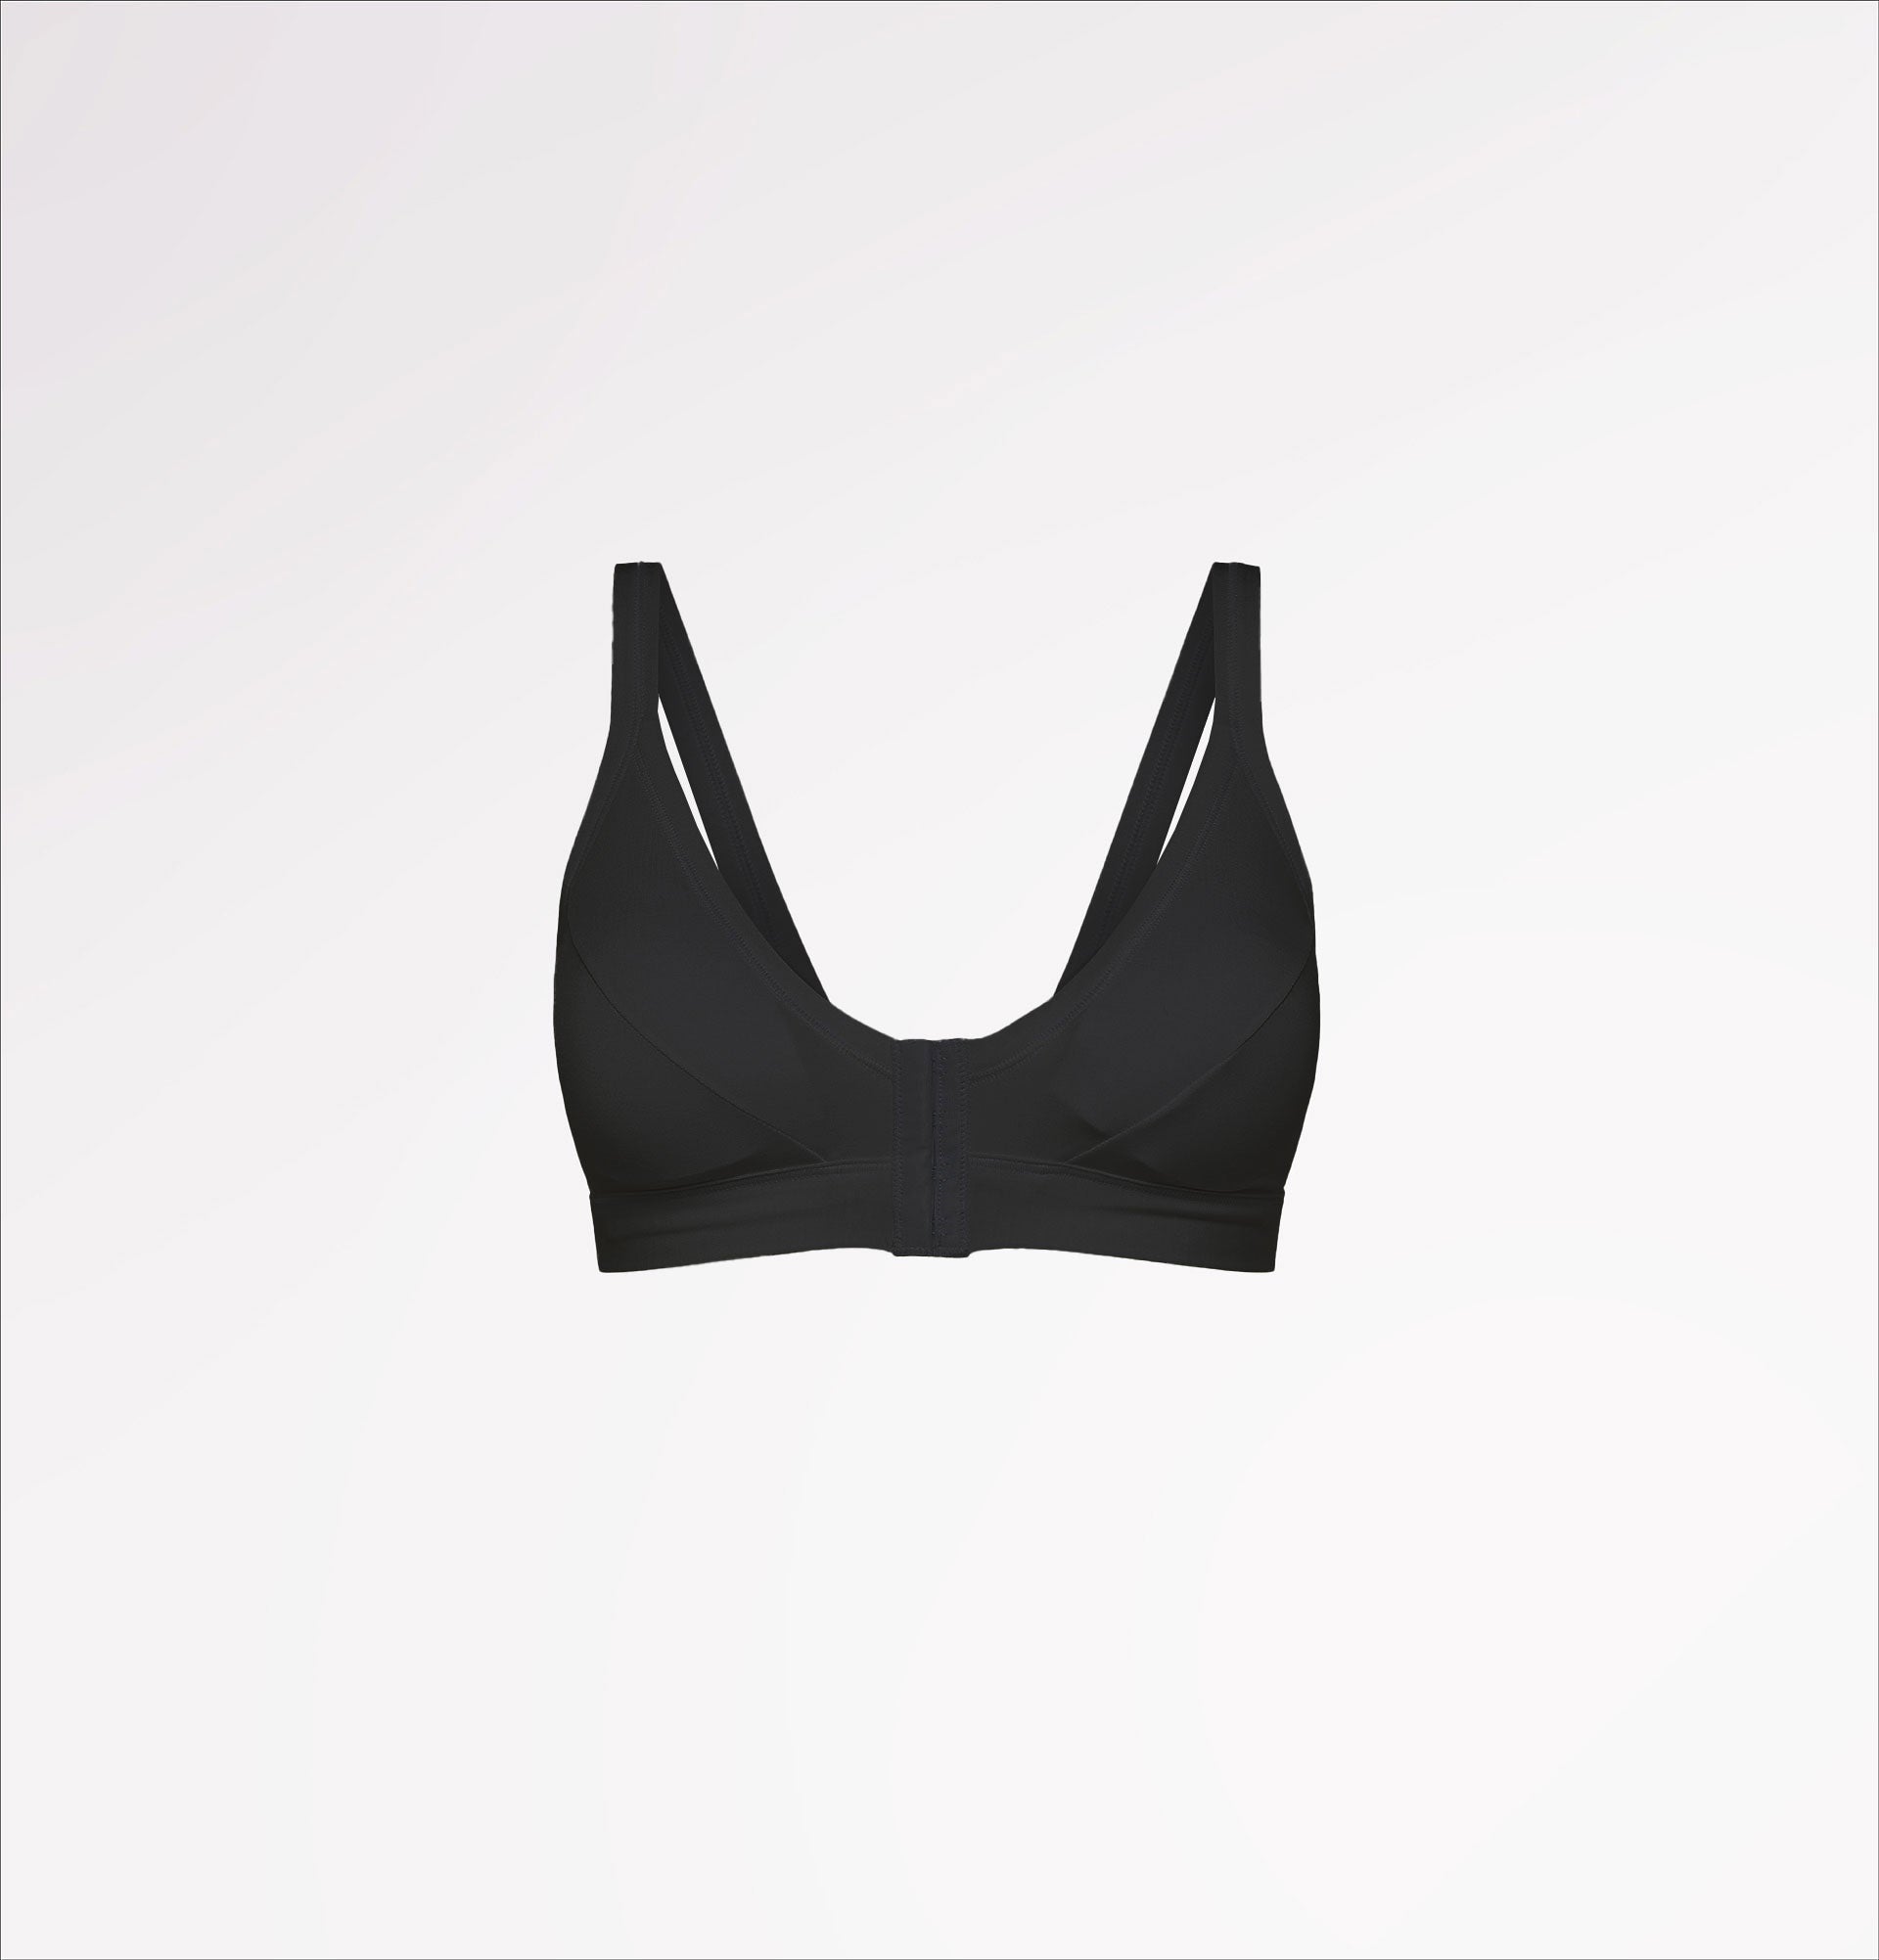 Bra with front closure cup in TENCEL™